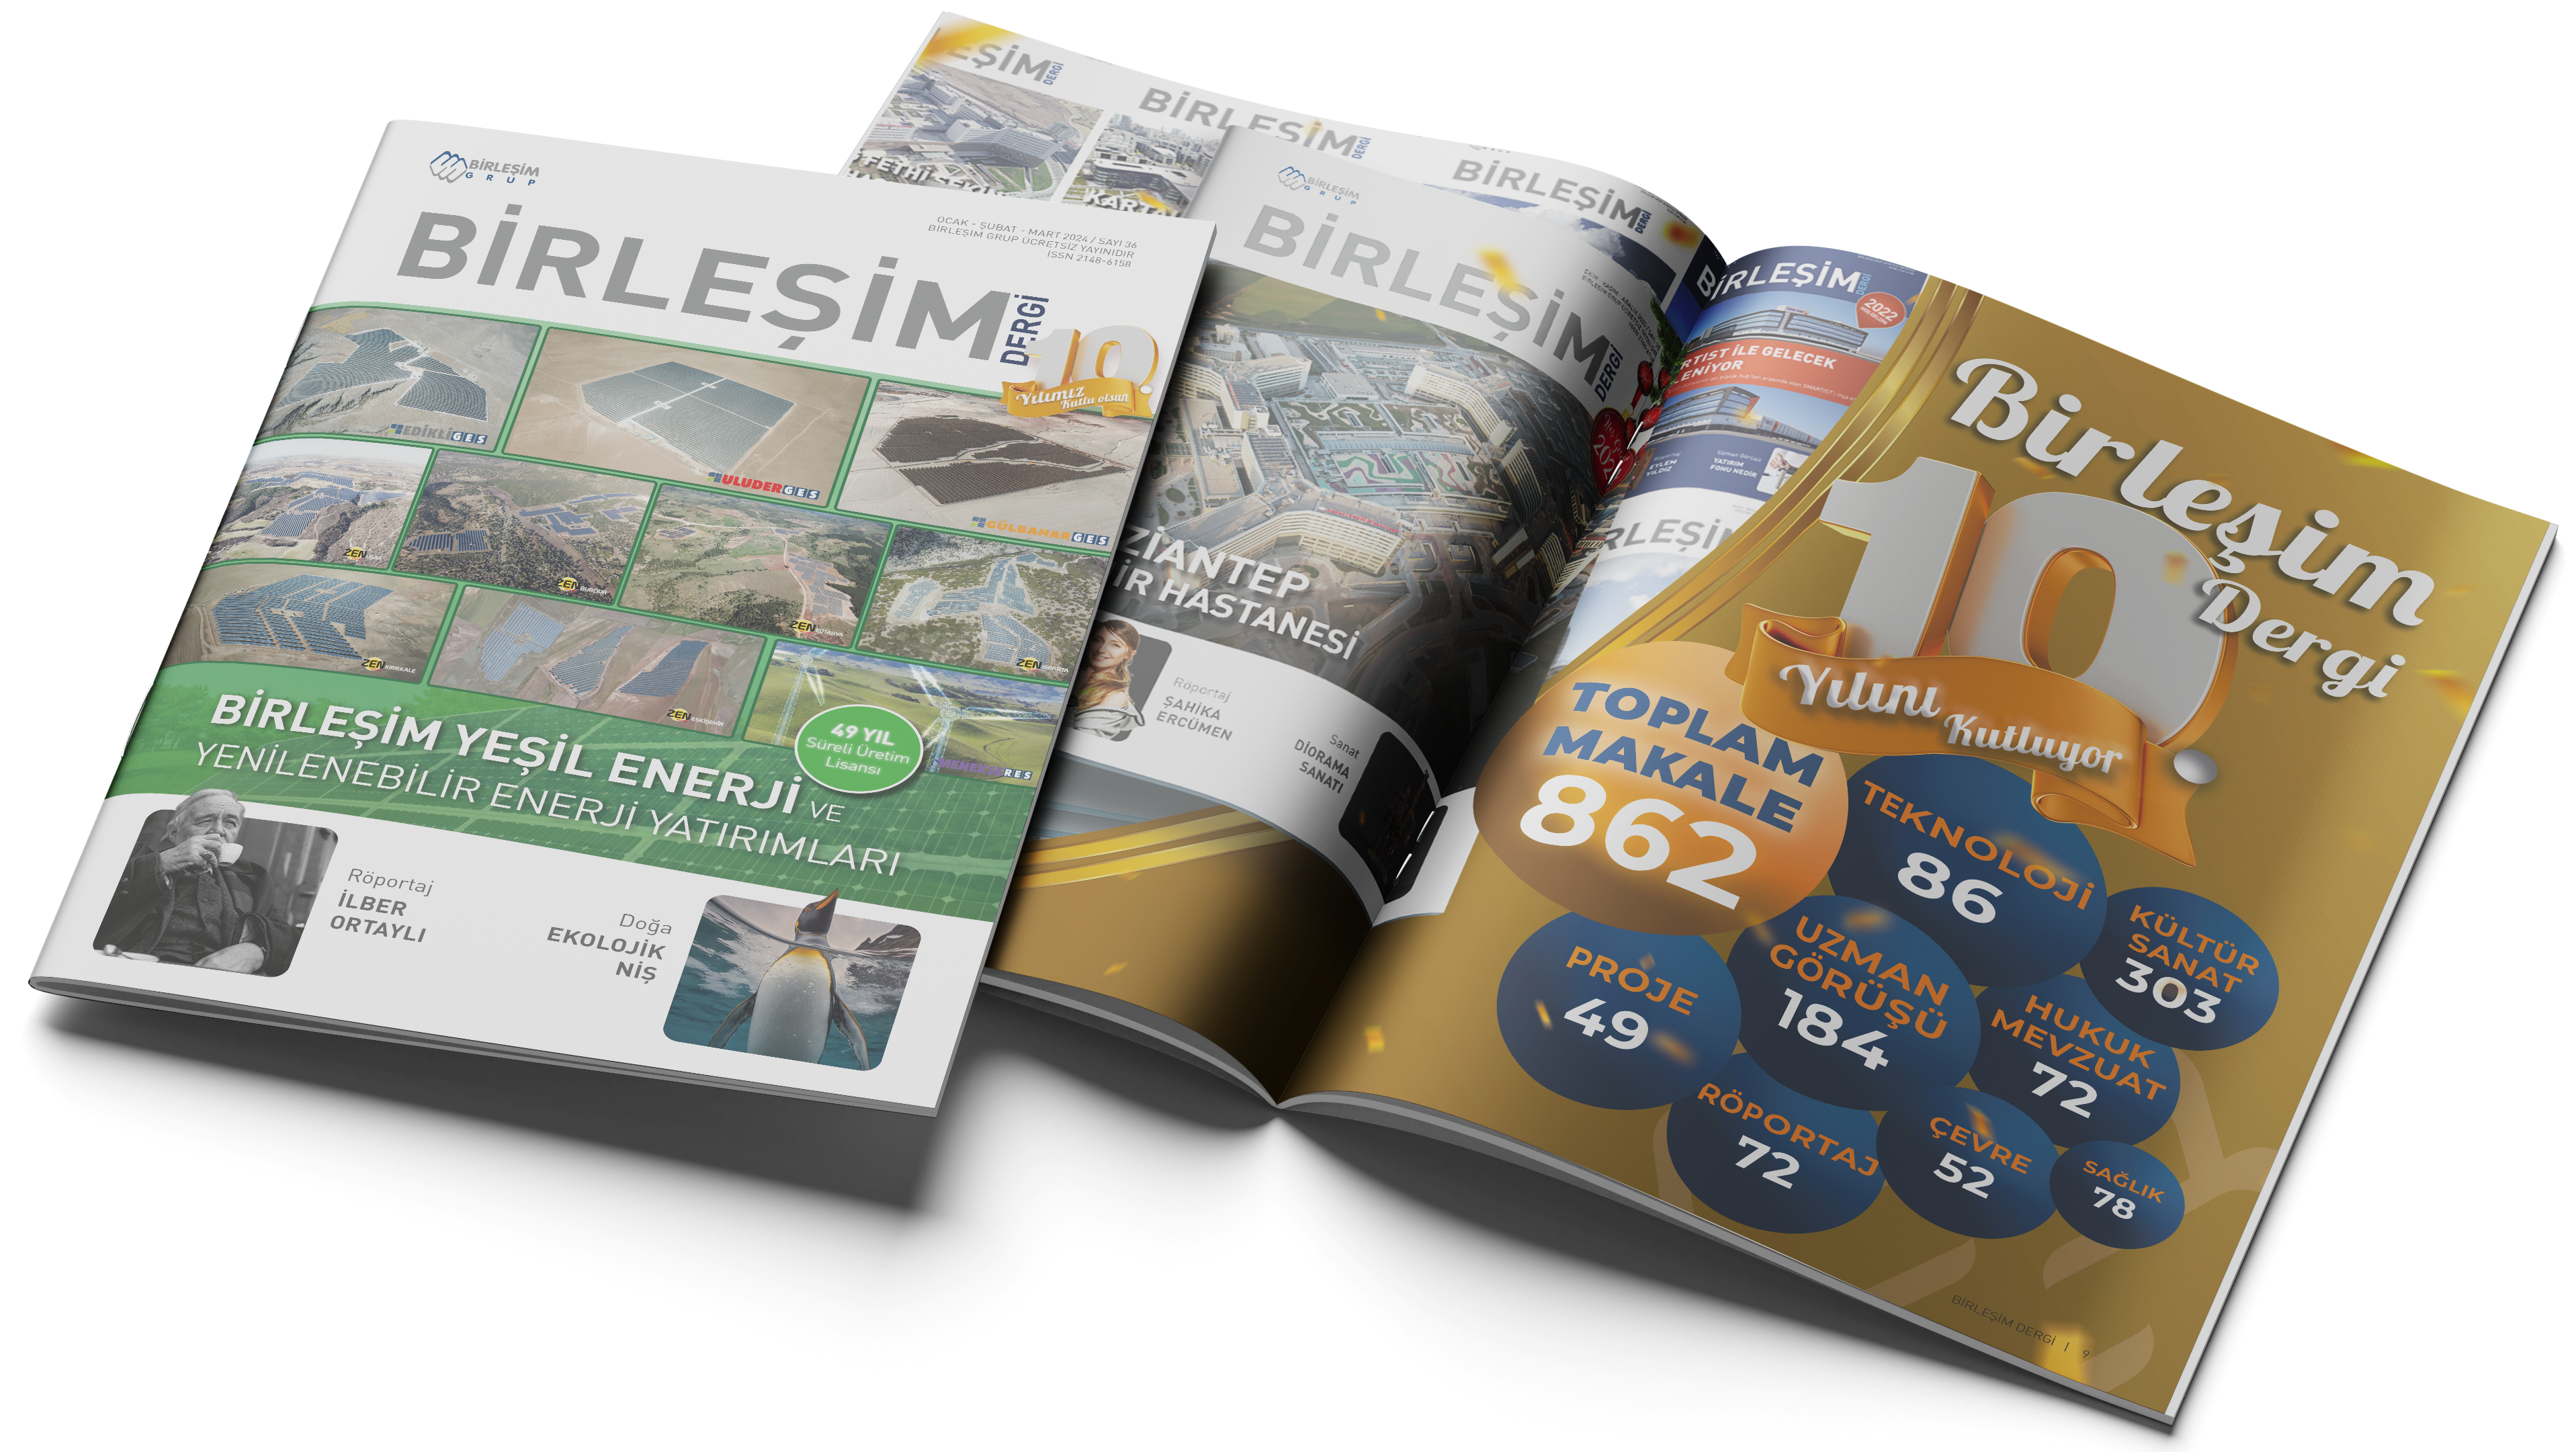 The Birleşim Dergi 36th Issue is Out!